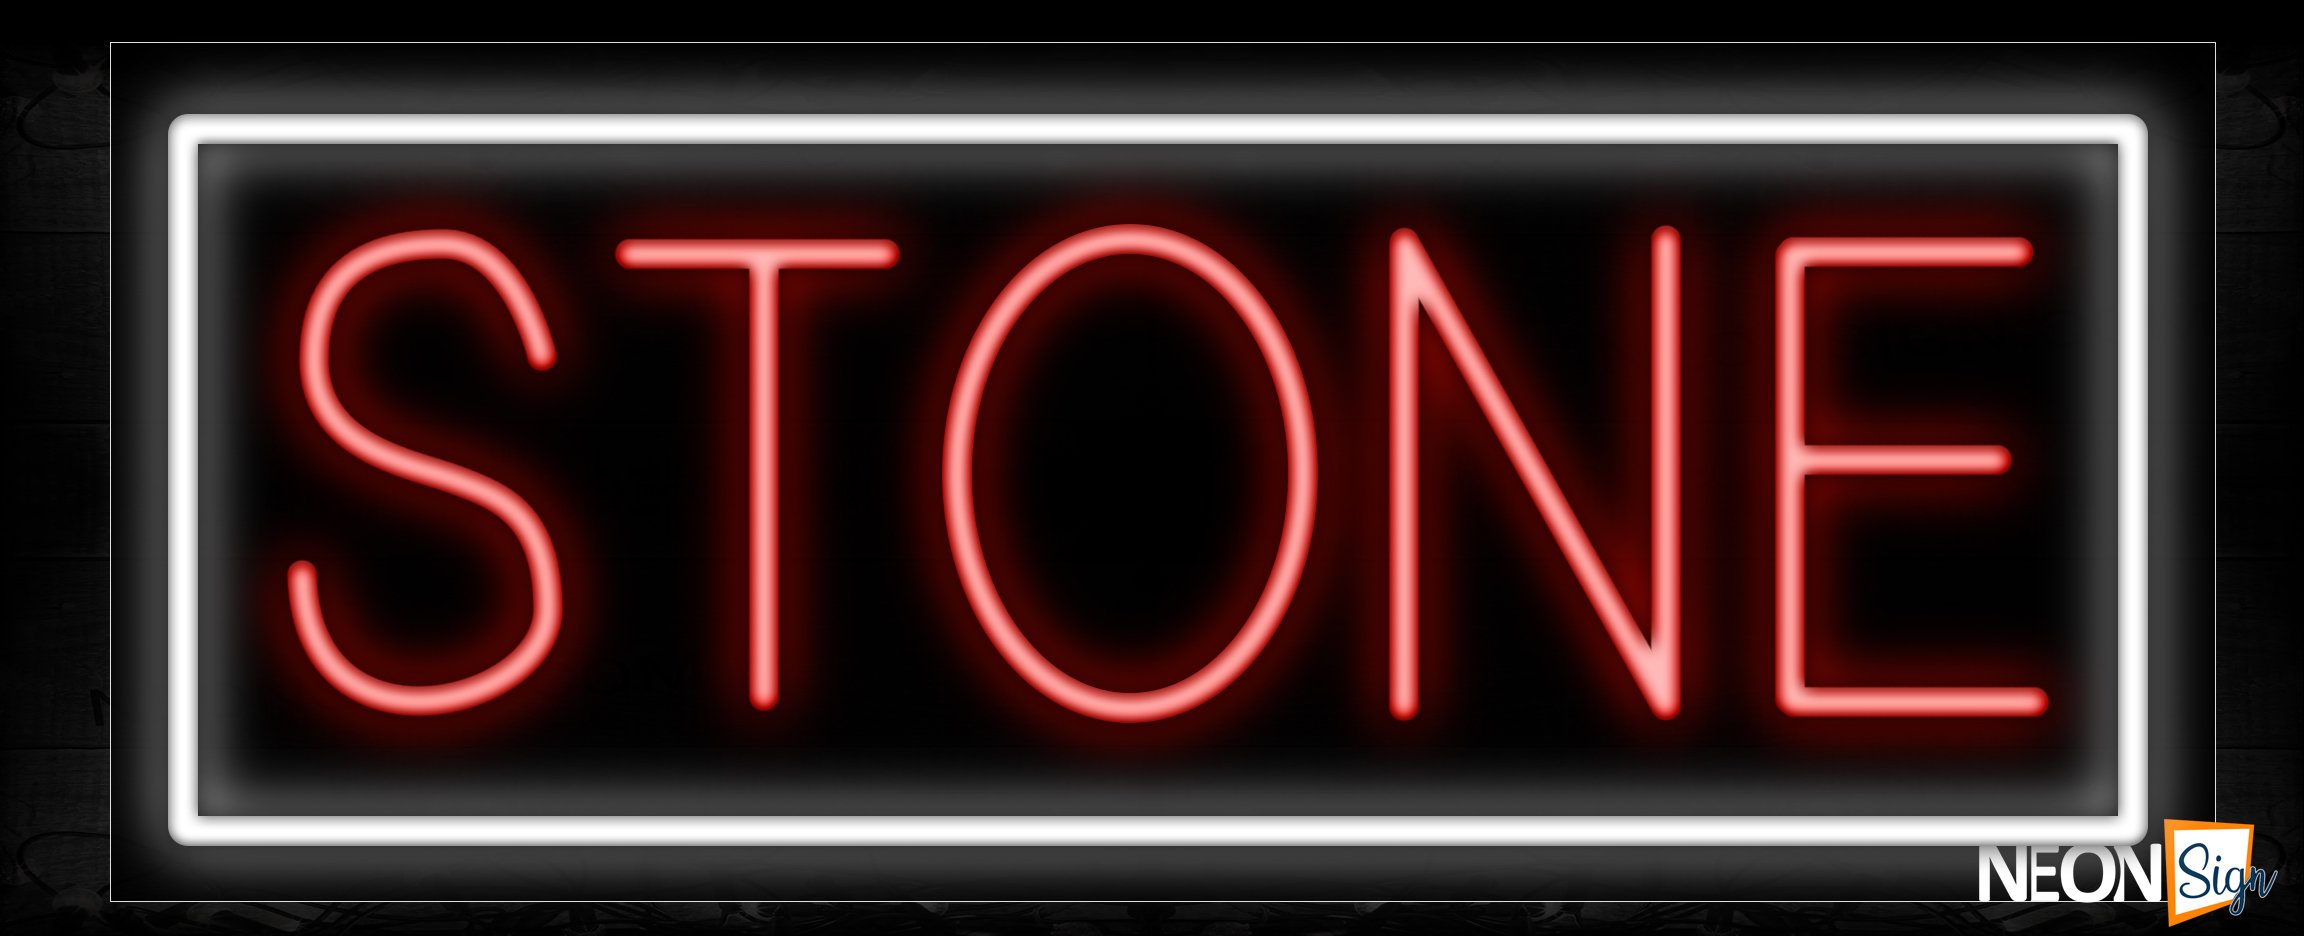 Image of 10629 STONE in red with white border Neon Sign_13x32 Black Backing